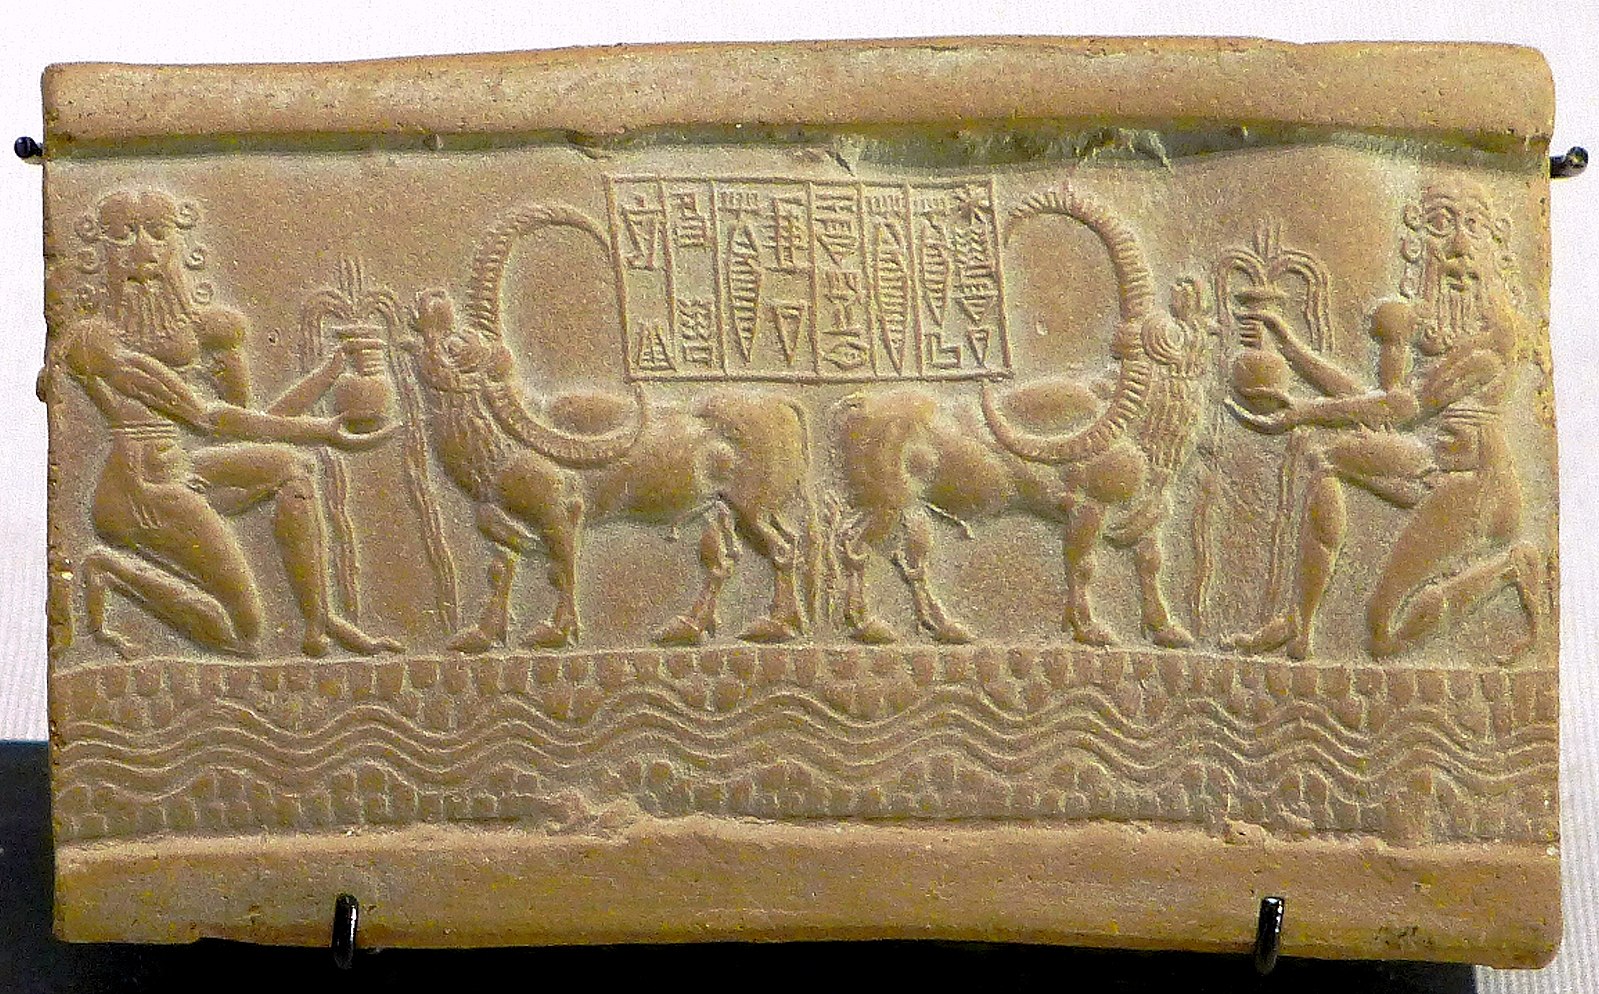 Creative Commons image from https://commons.wikimedia.org/wiki/File:Impression_of_an_Akkadian_cylinder_seal_with_inscription_The_Divine_Sharkalisharri_Prince_of_Akkad_Ibni-Sharrum_the_Scribe_his_servant.jpg